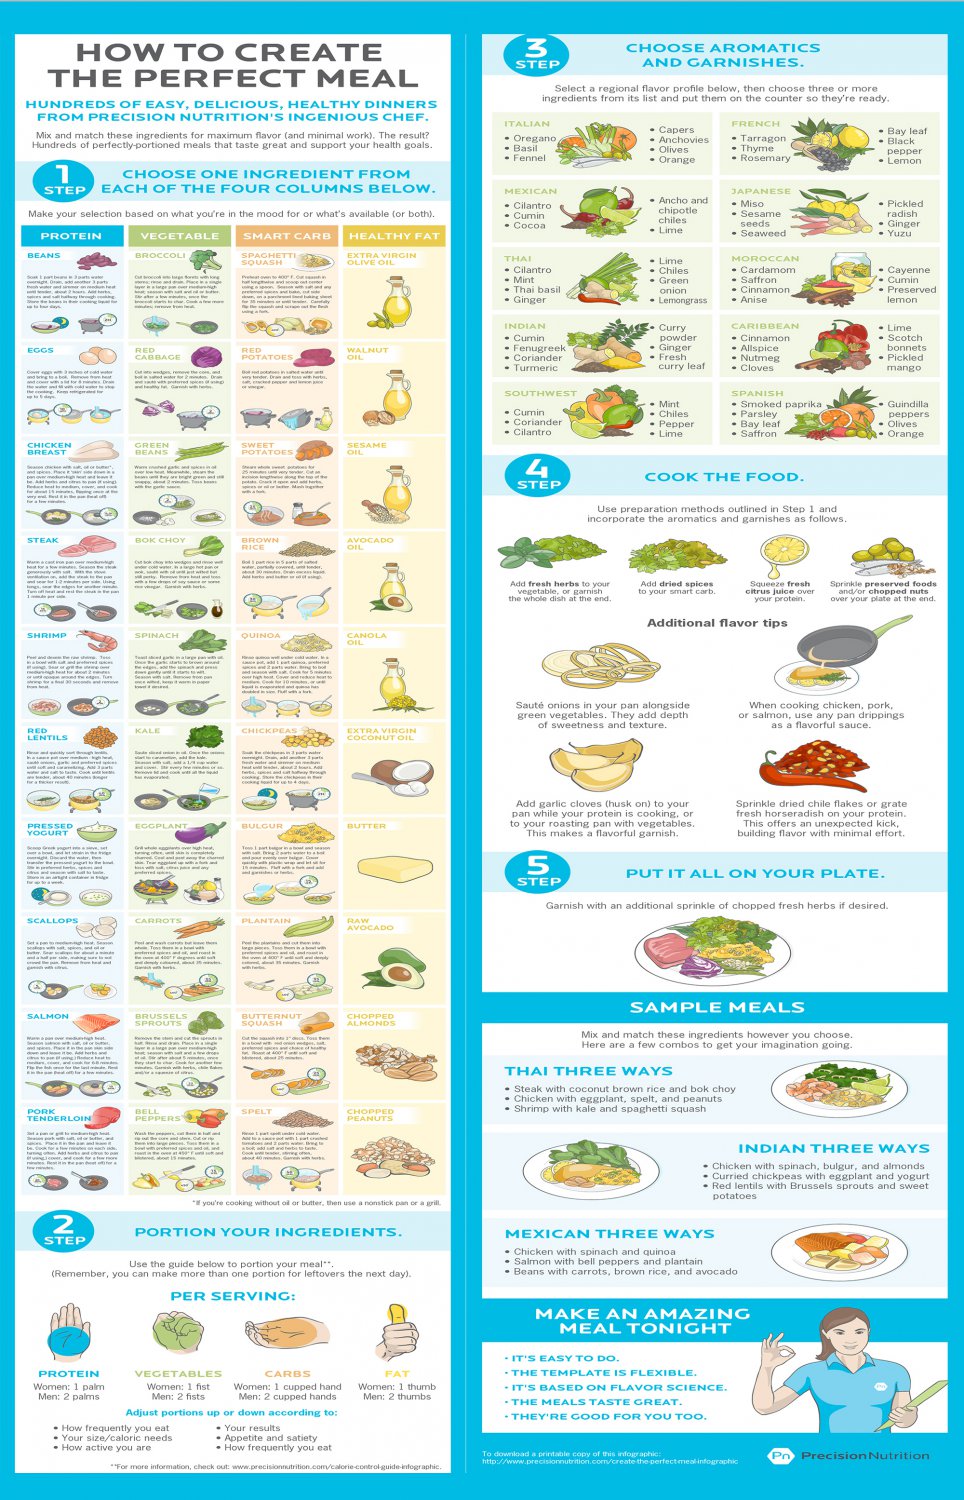 How to Create The Perfect Meal Chart 13"x19" (32cm/49cm) Polyester Fabric Poster